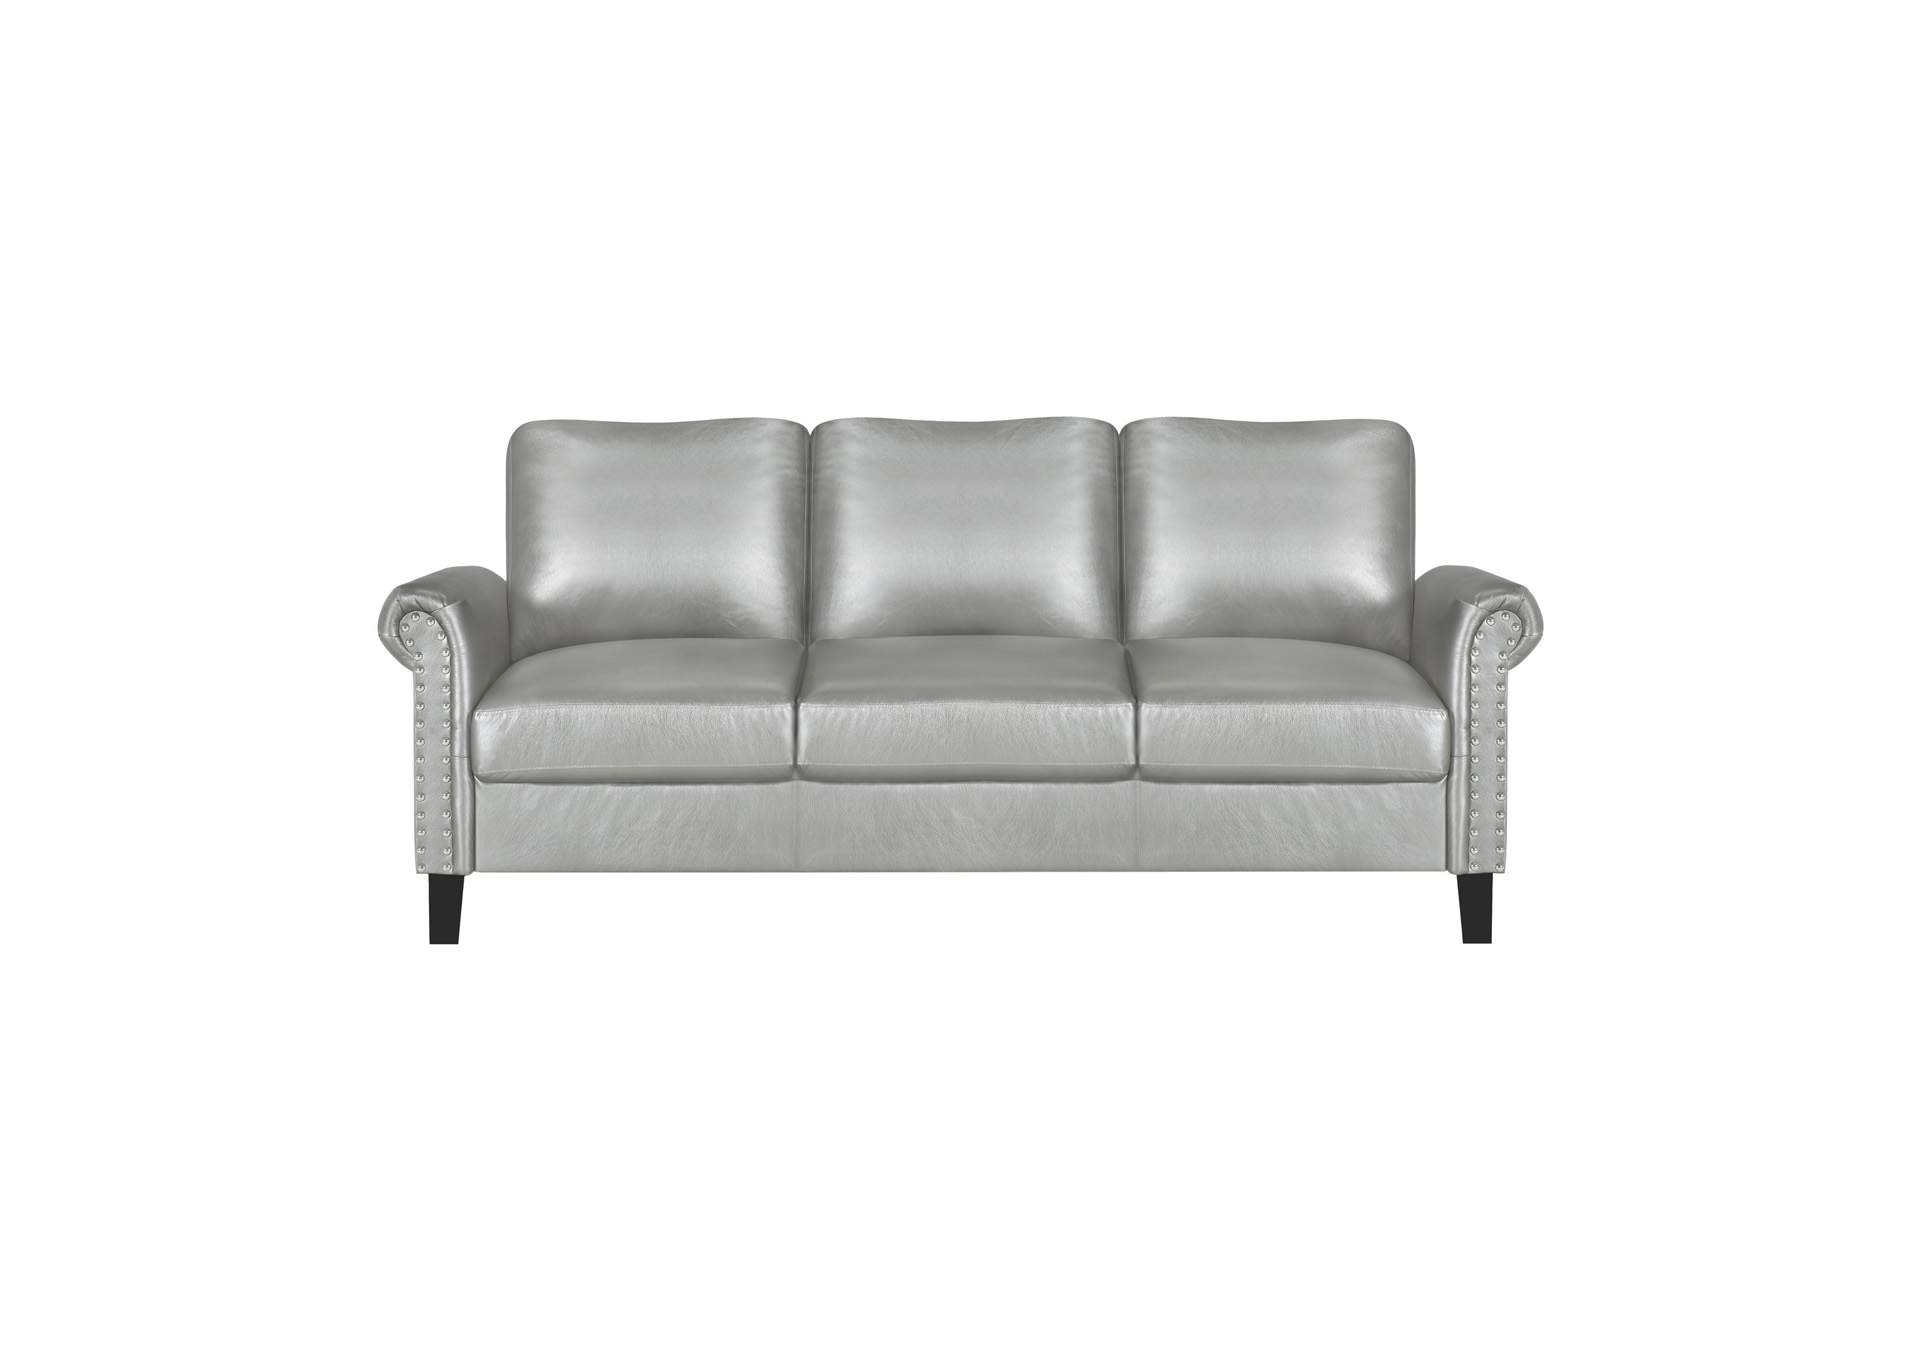 Silver Faux Leather Sofa Best, Silver Leather Couch